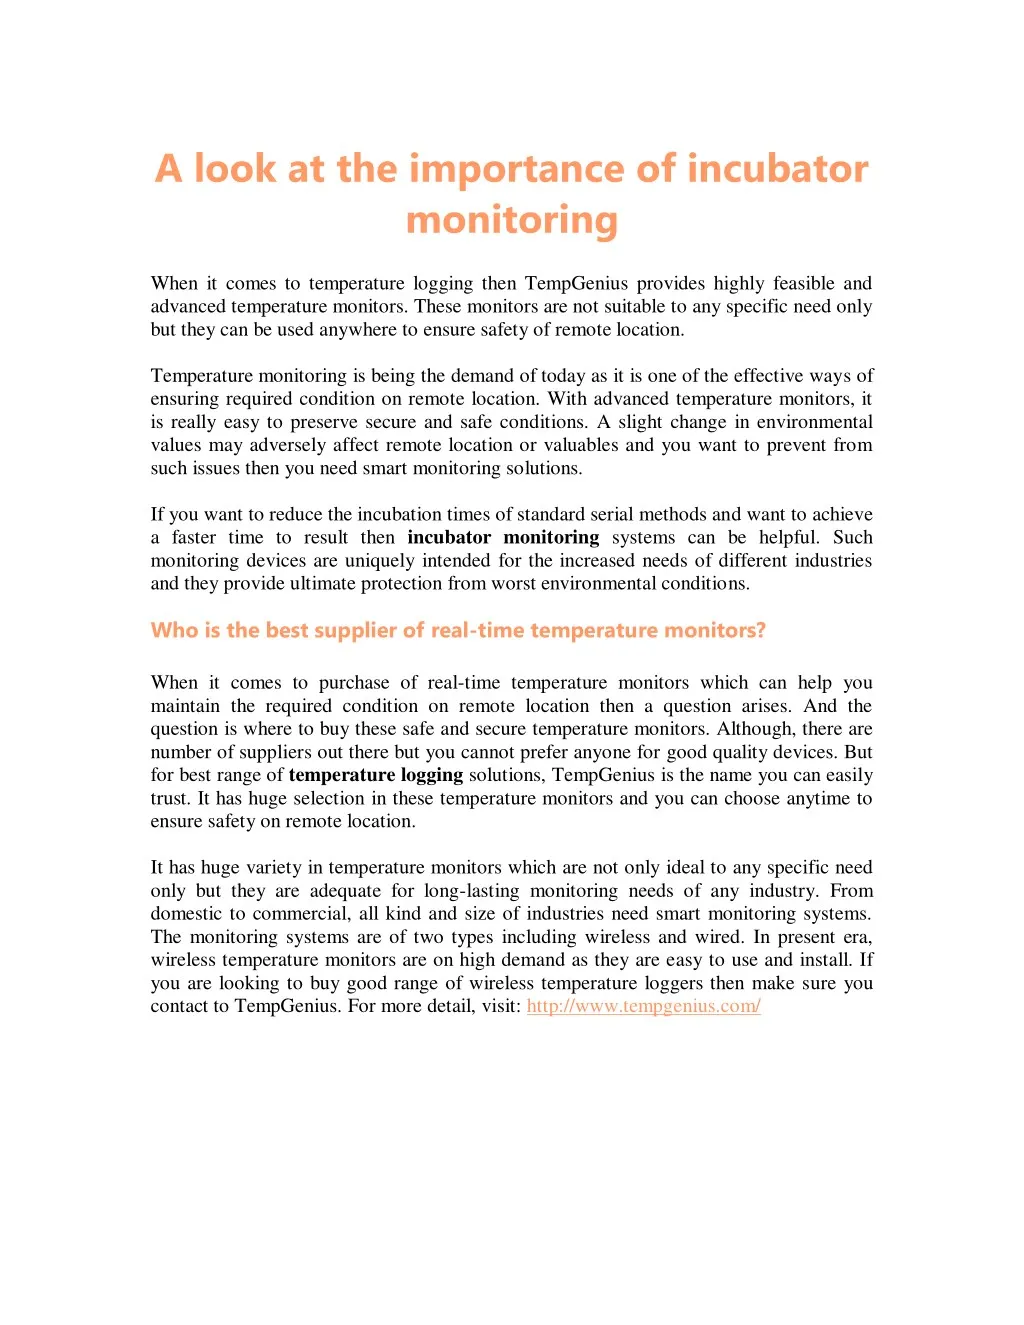 a look at the importance of incubator monitoring